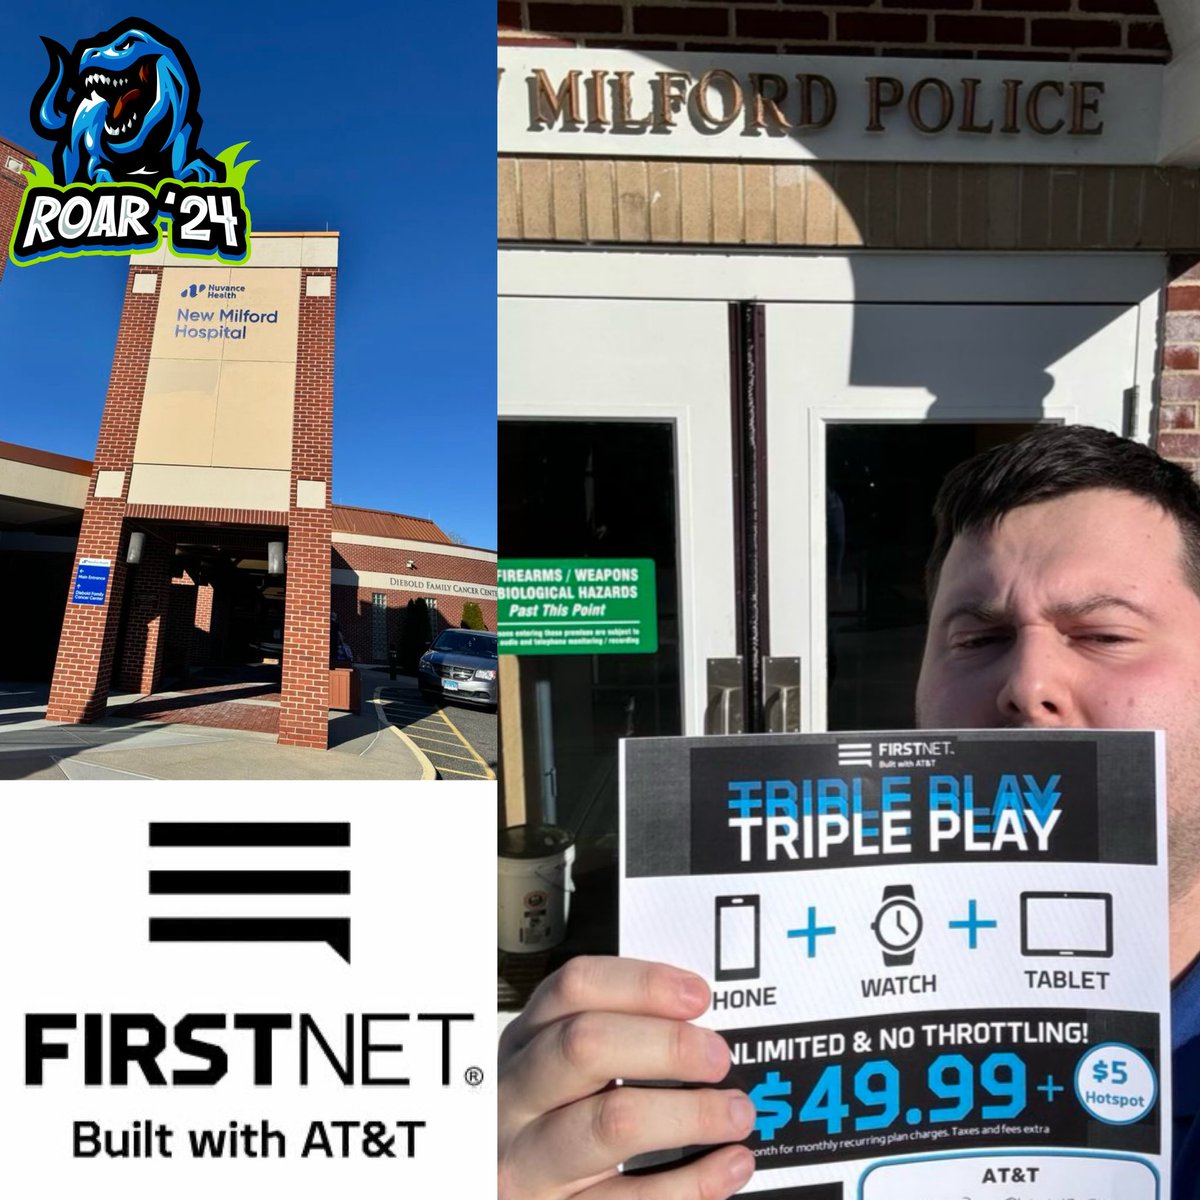 Our #Prime pARtners in New Milford getting outside the 4 walls on #FirstNet Friday to visit their local first responders and educate them on the amazing offers. #Roar24 #wiNEverything @firas_smadi @emilywiper @TheRealOurNE @CarlosALoaiza13